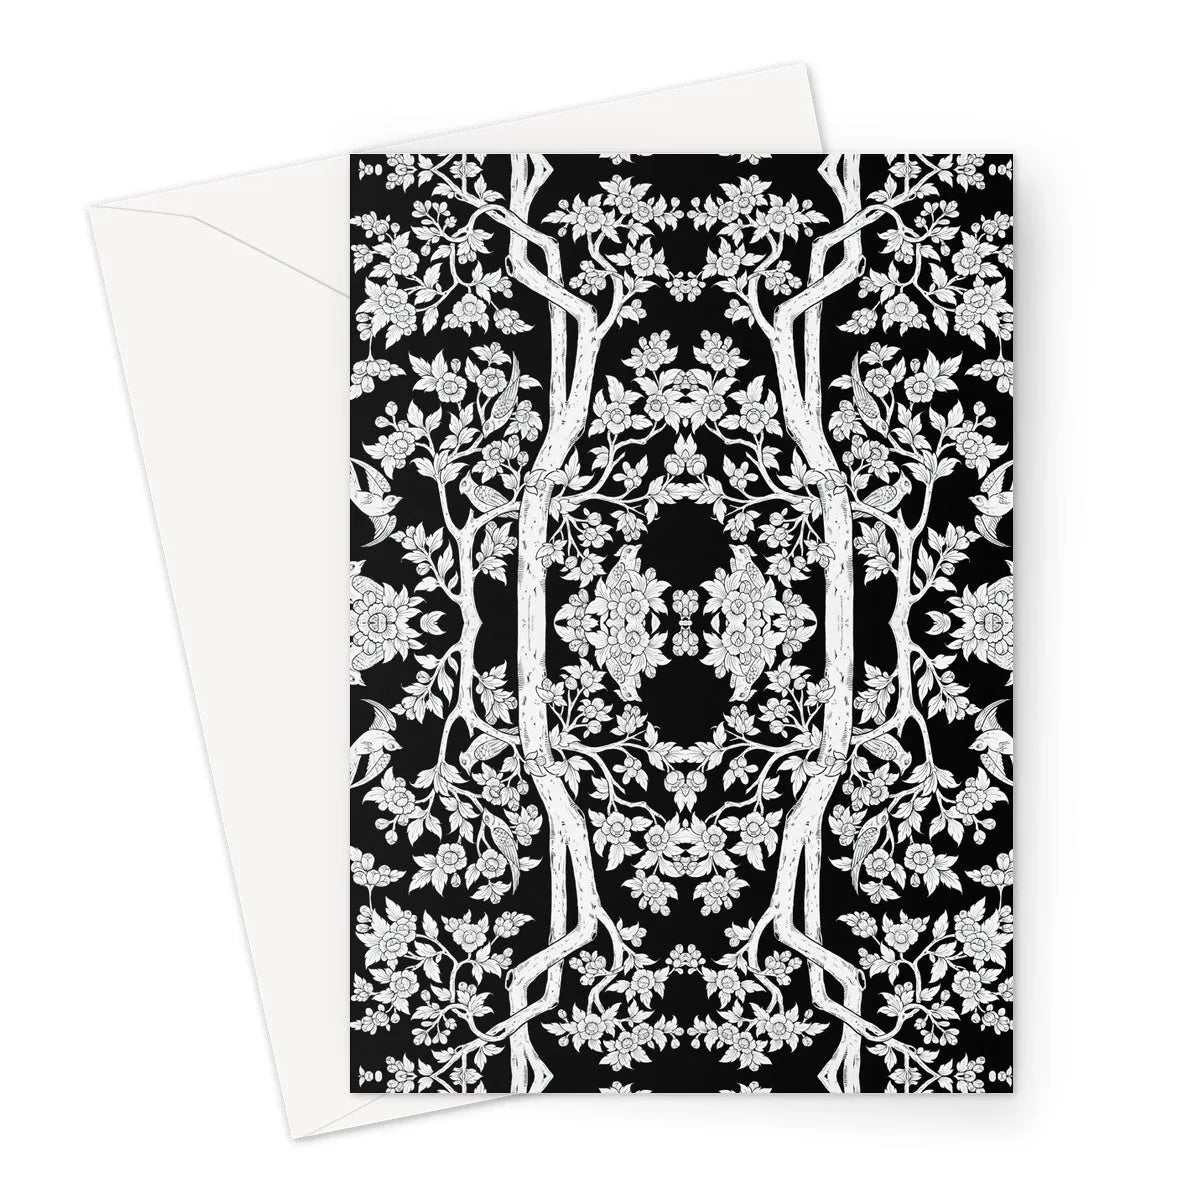 Aviary Black Greeting Card - A5 Portrait / 1 Card - Greeting & Note Cards - Aesthetic Art